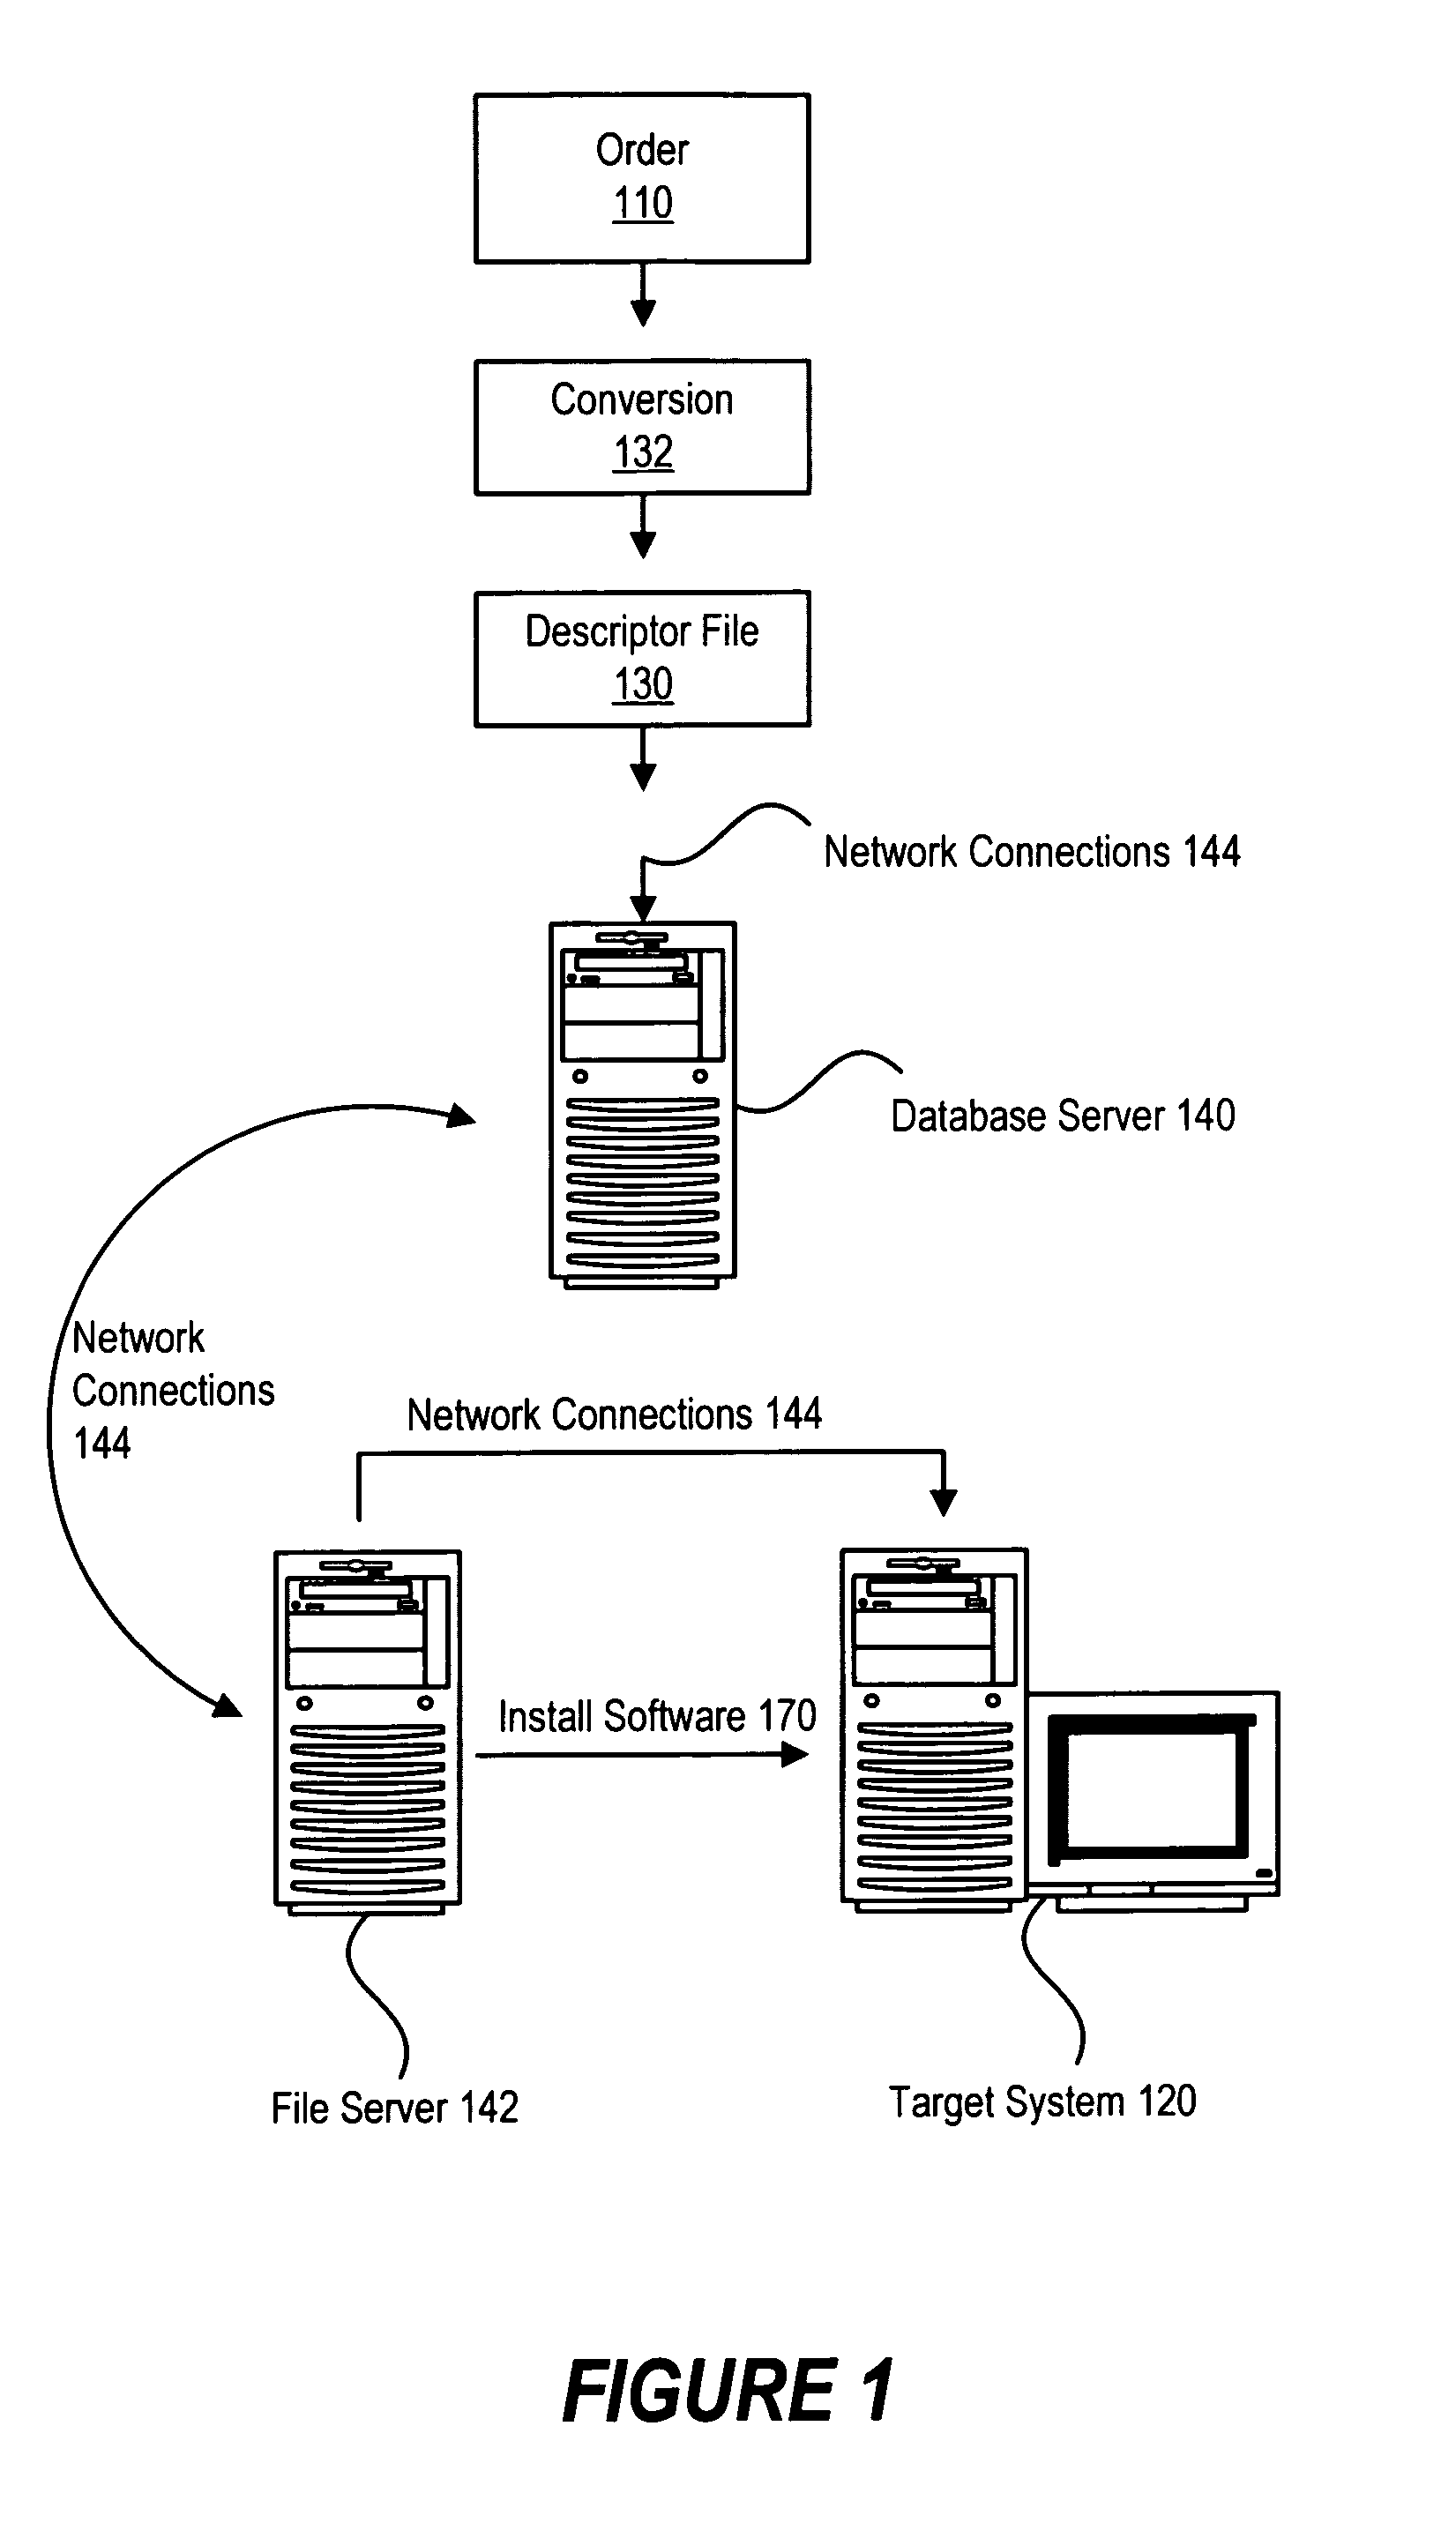 Cache system in factory server for software dissemination